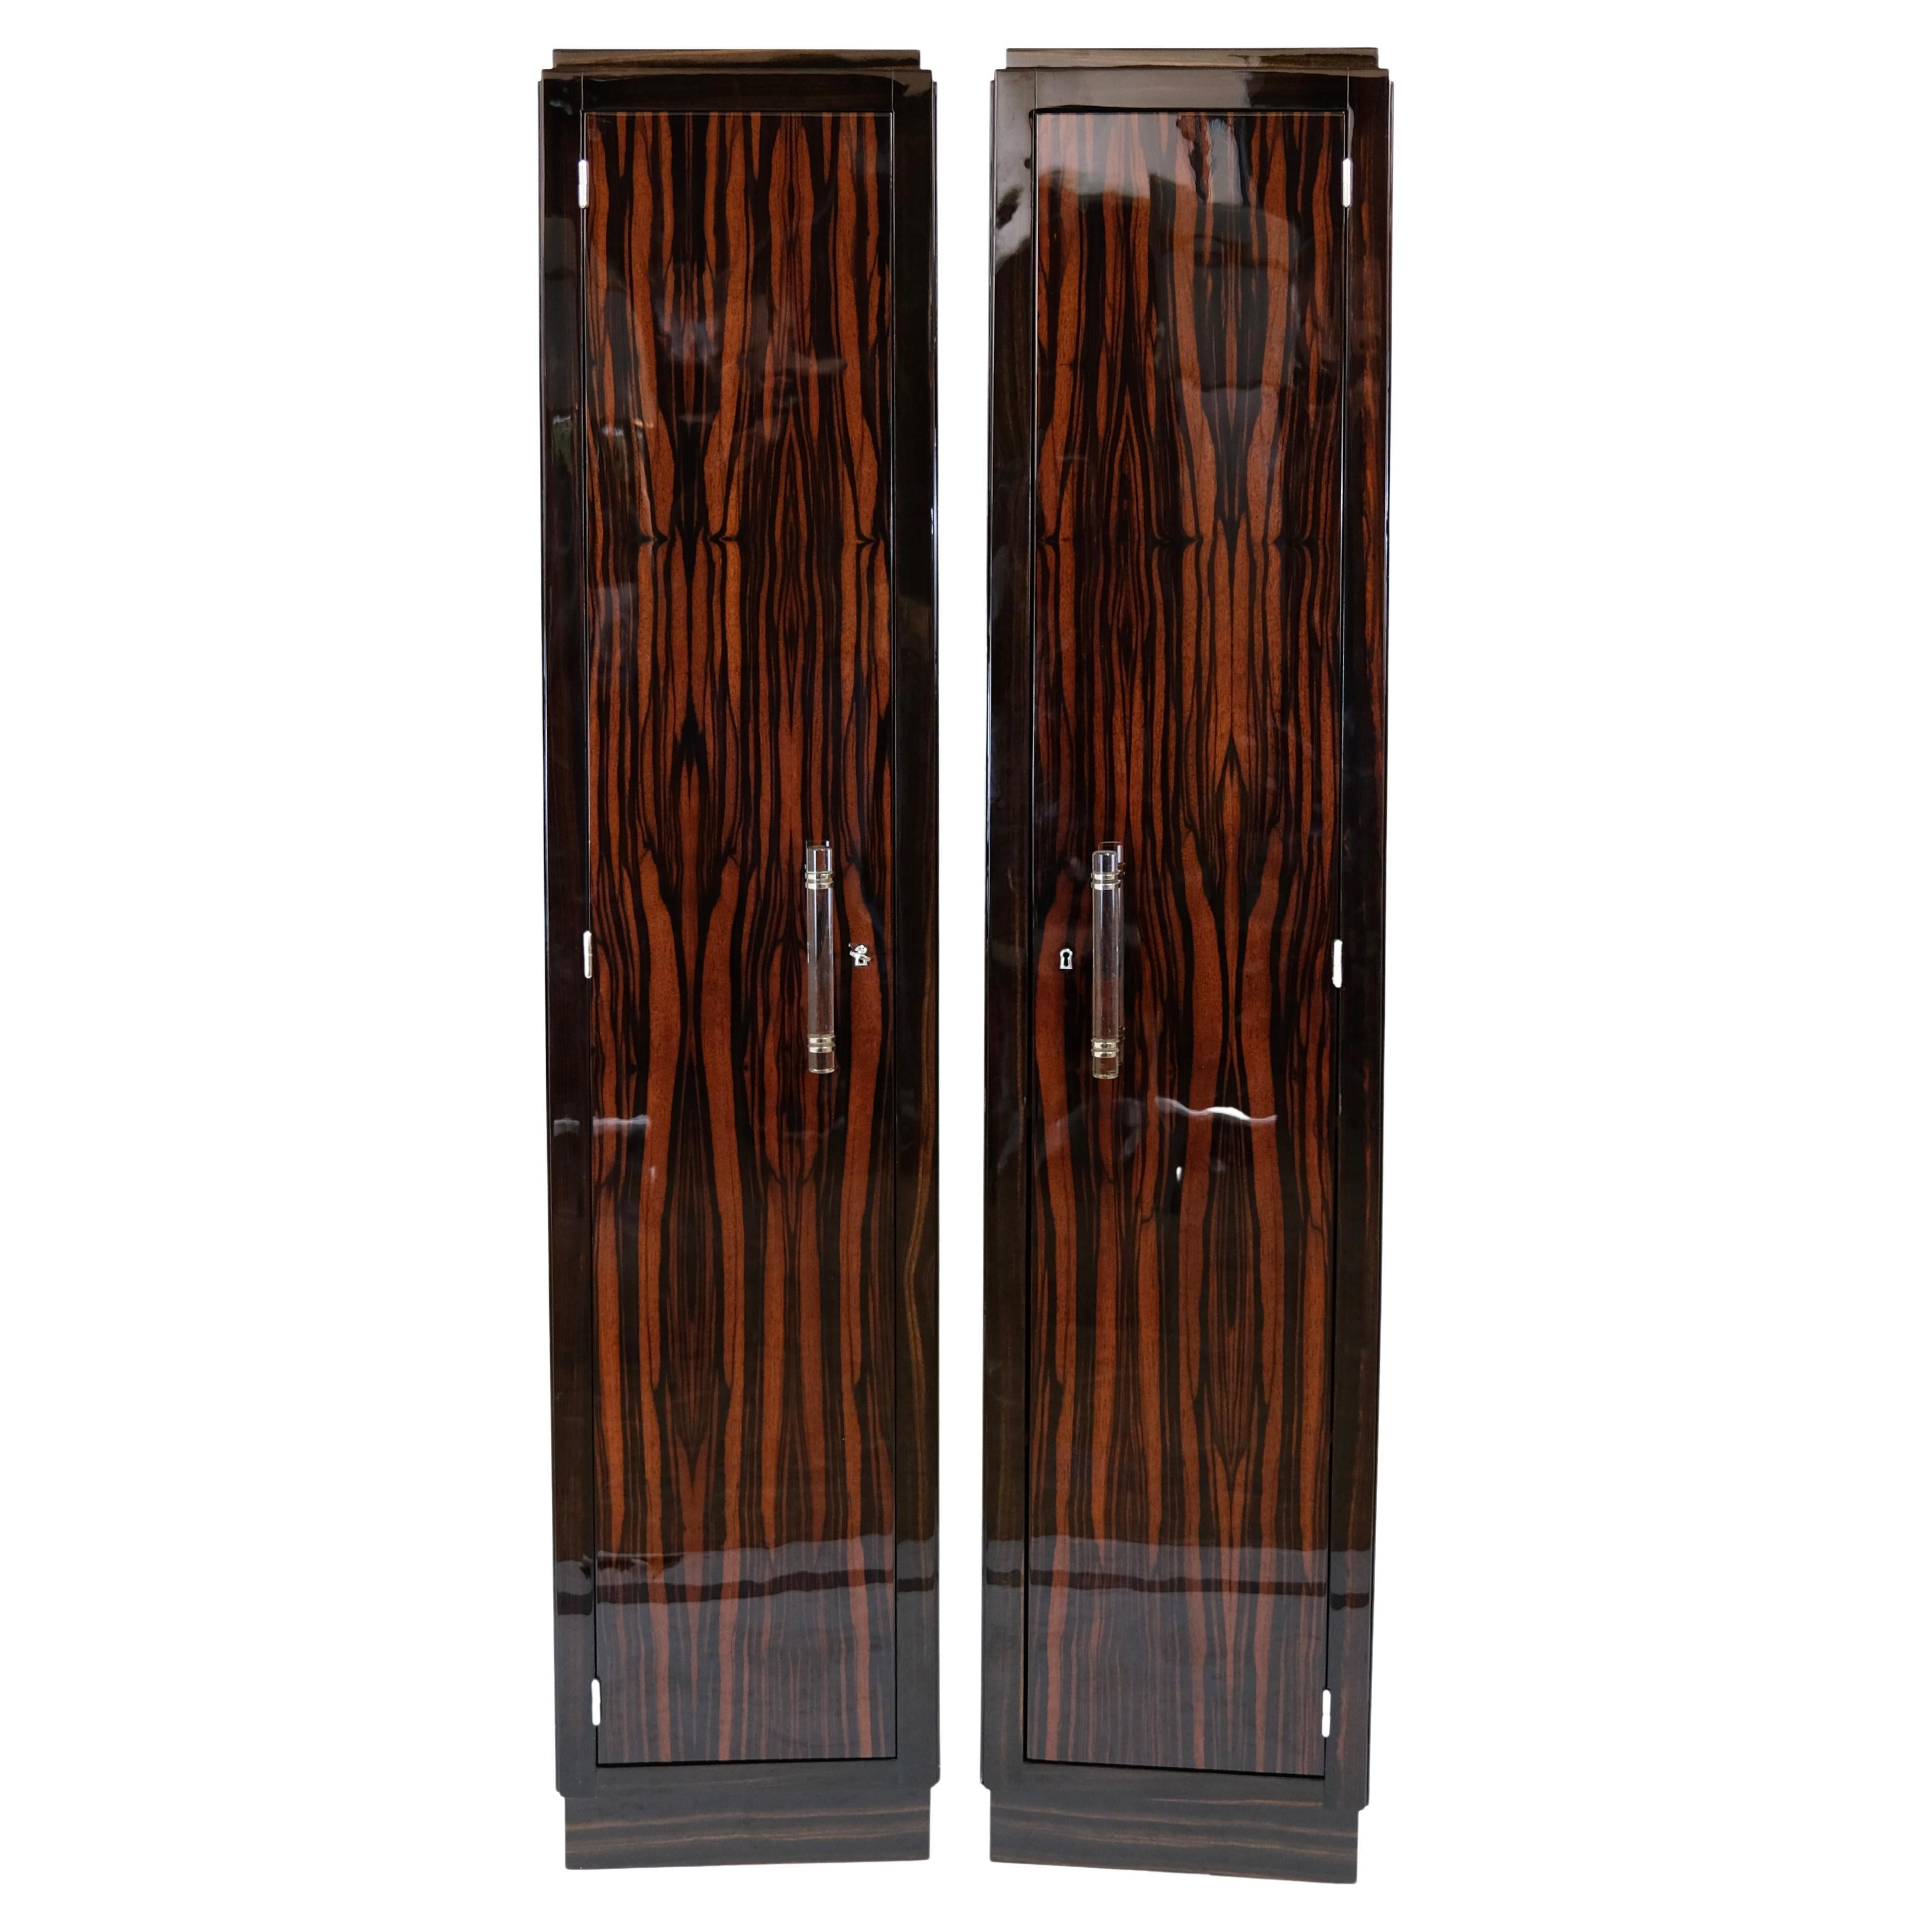 Pair of French Art Deco Cabinets with Macassar Veneer and Black Lacquer Body